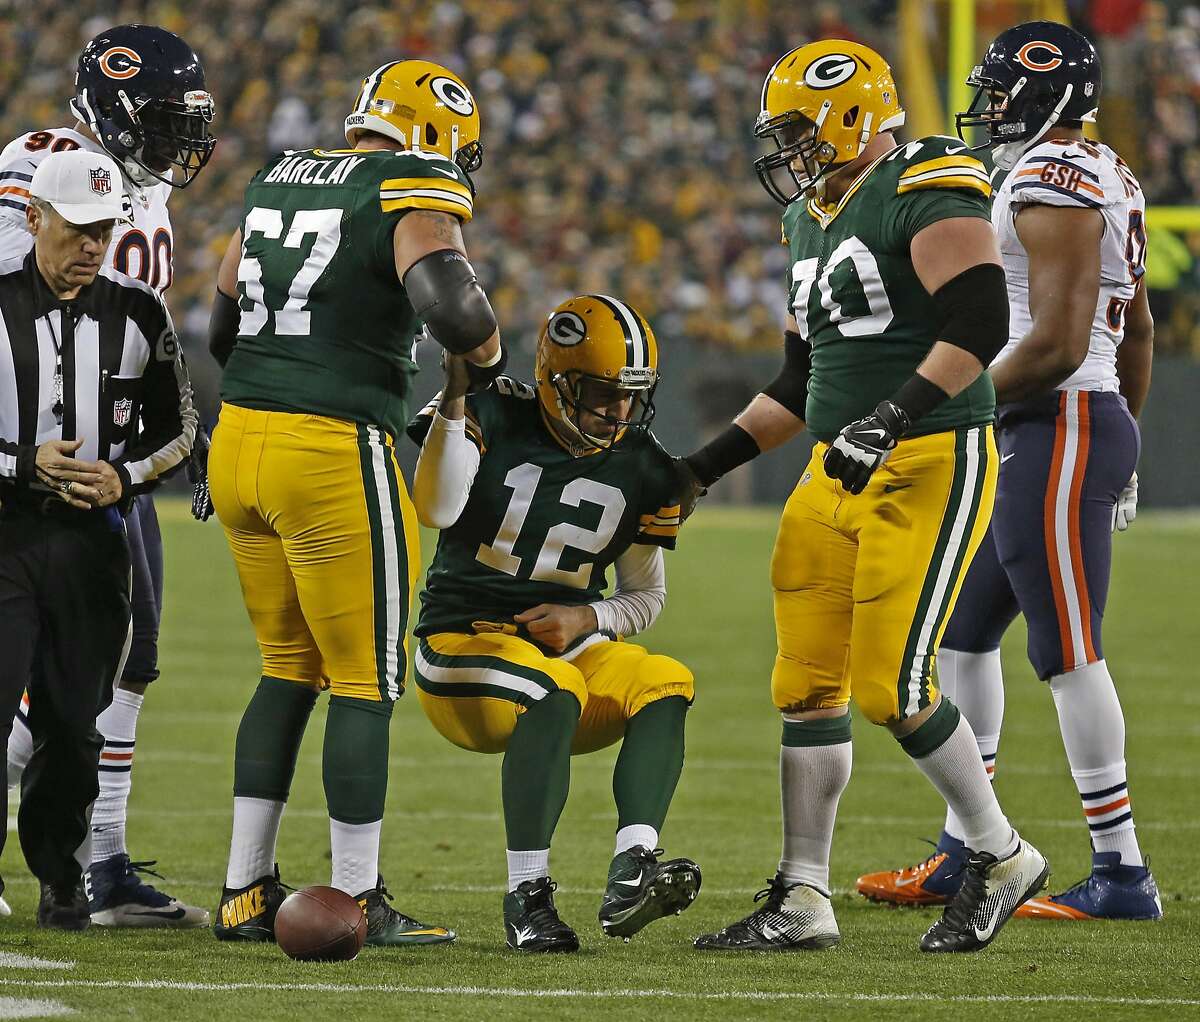 Green Bay Packers quarterback Aaron Rodgers is helped up by teammates tackle Don Barclay (67) and guard T.J. Lang (70) after being injured on a play by Chicago Bears defensive end Shea McClellin during an NFL football game Monday, Nov. 4, 2013, in Green Bay, Wis. (AP Photo/Matt Ludtke)